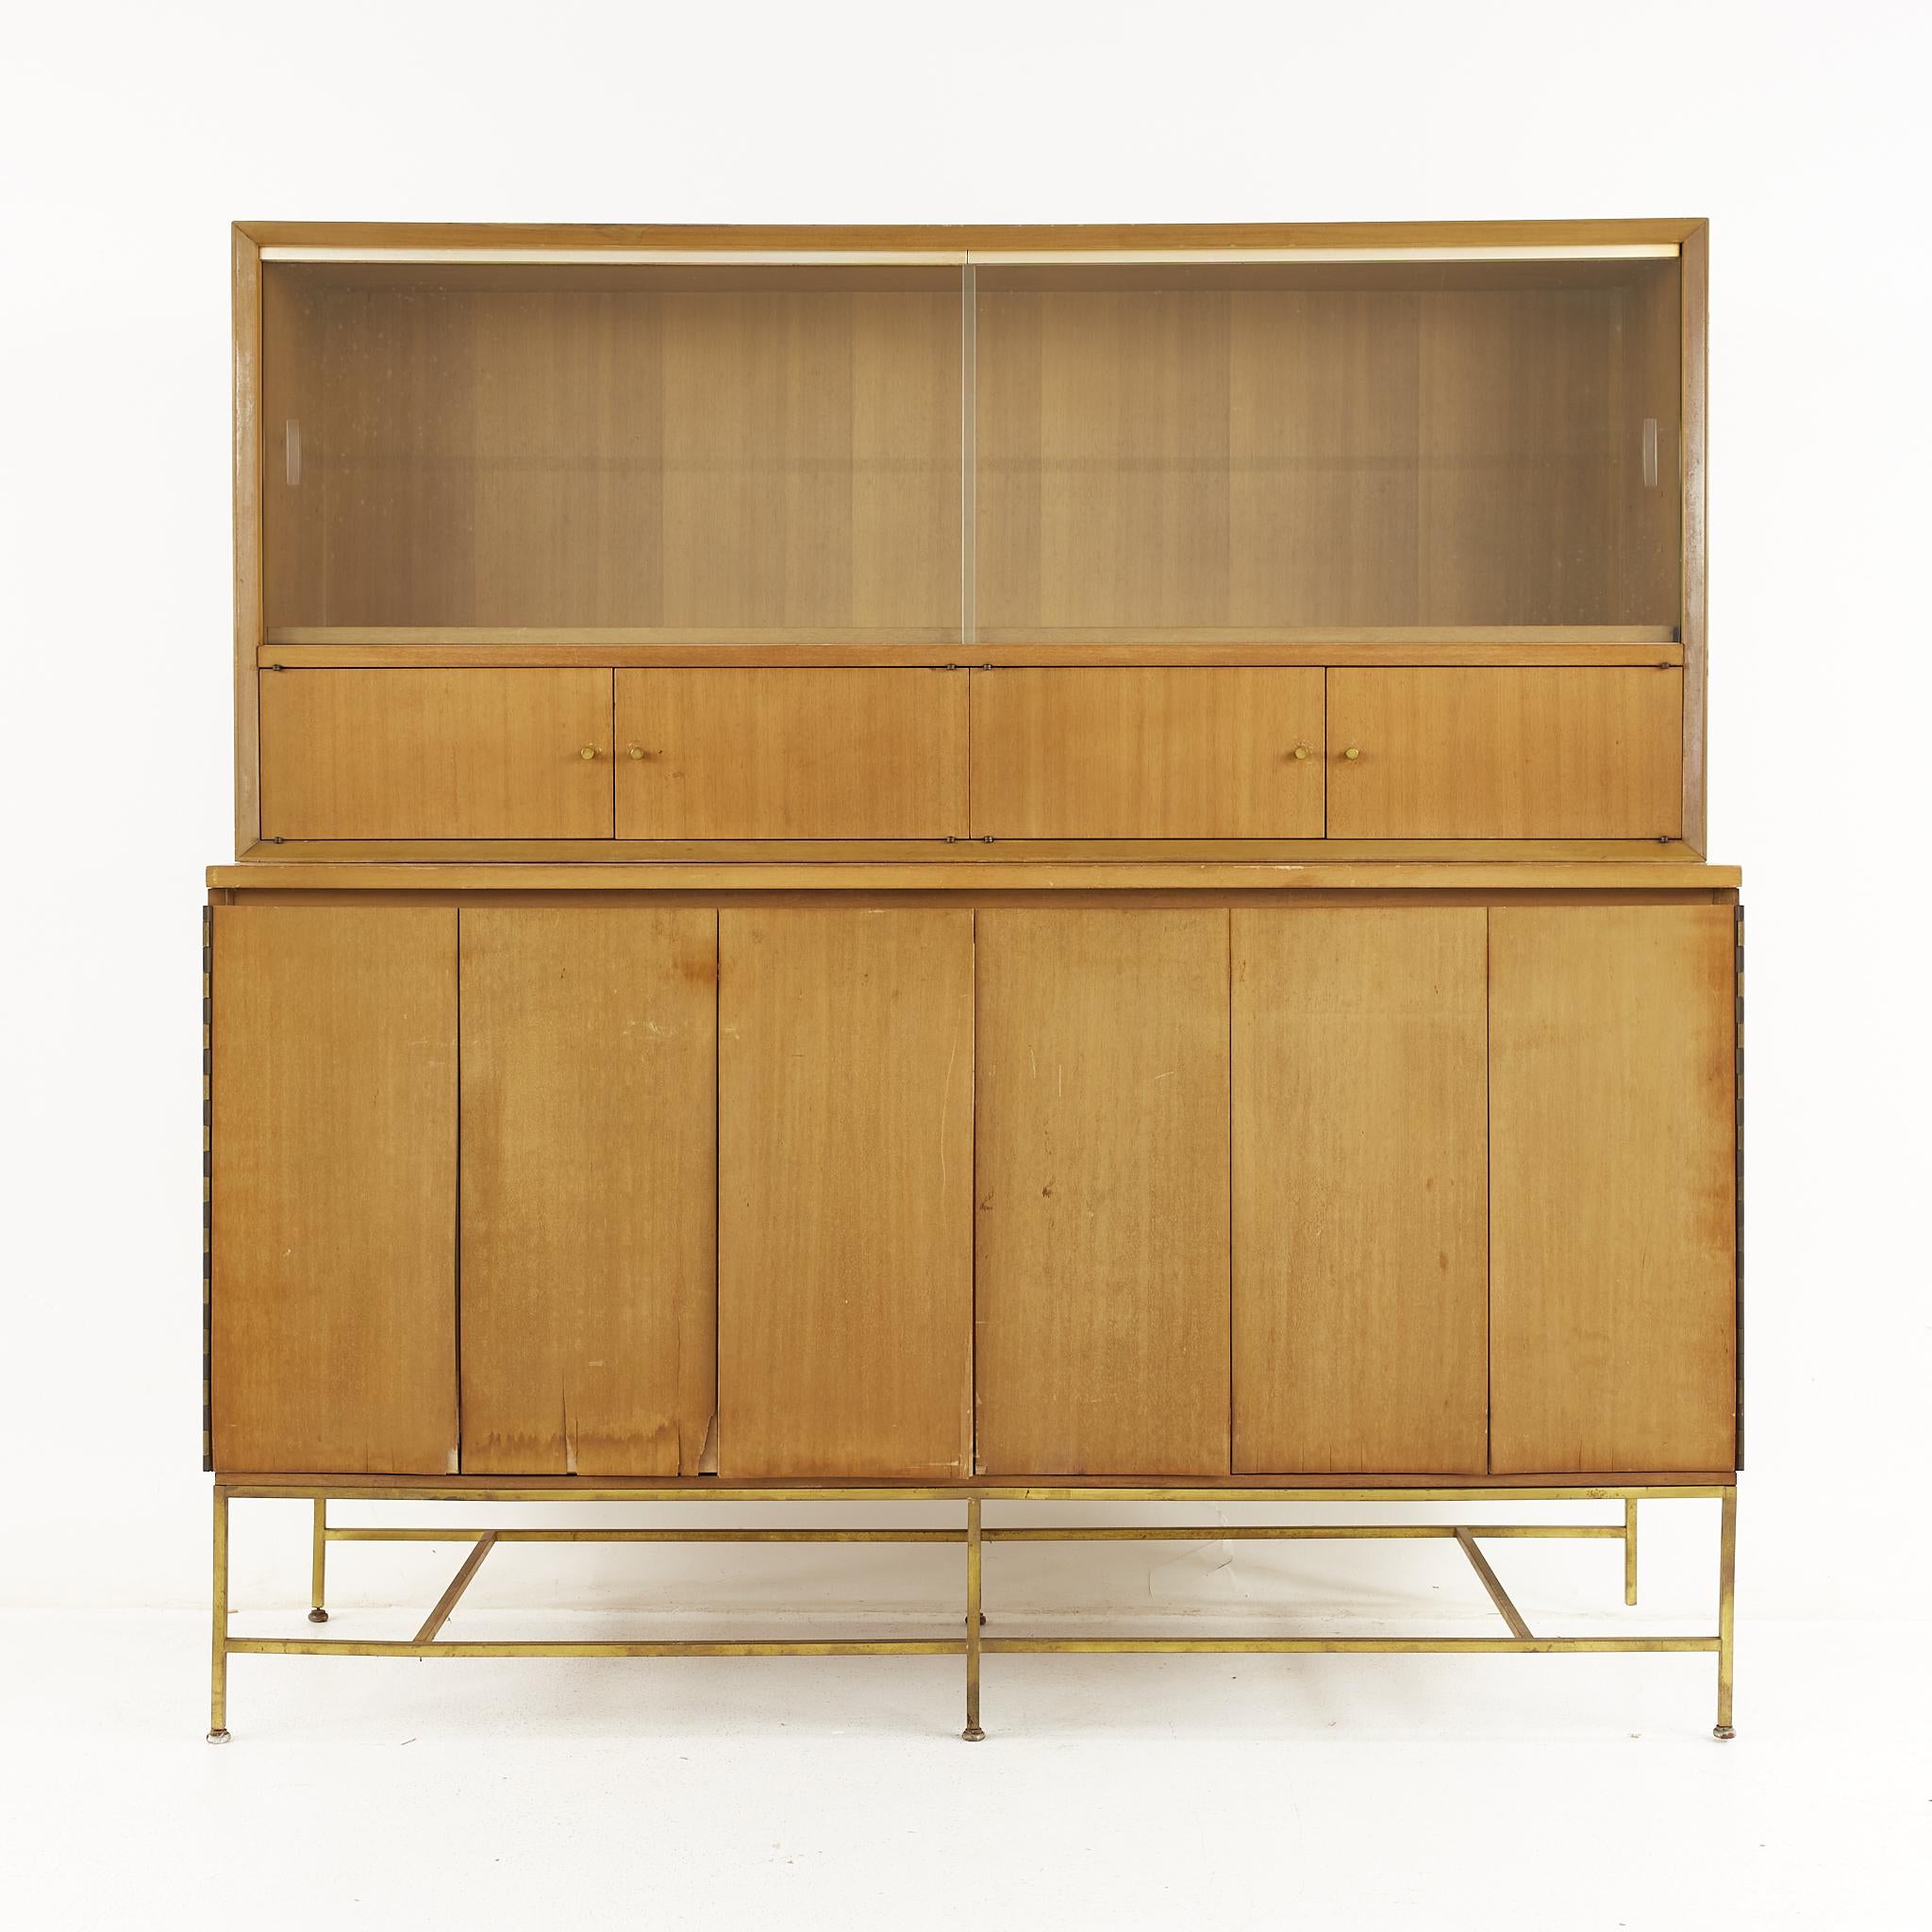 Paul McCobb for Calvin mid century brass base credenza with hutch

The credenza measures: 60 wide x 19 deep x 60.75 inches 

All pieces of furniture can be had in what we call restored vintage condition. That means the piece is restored upon